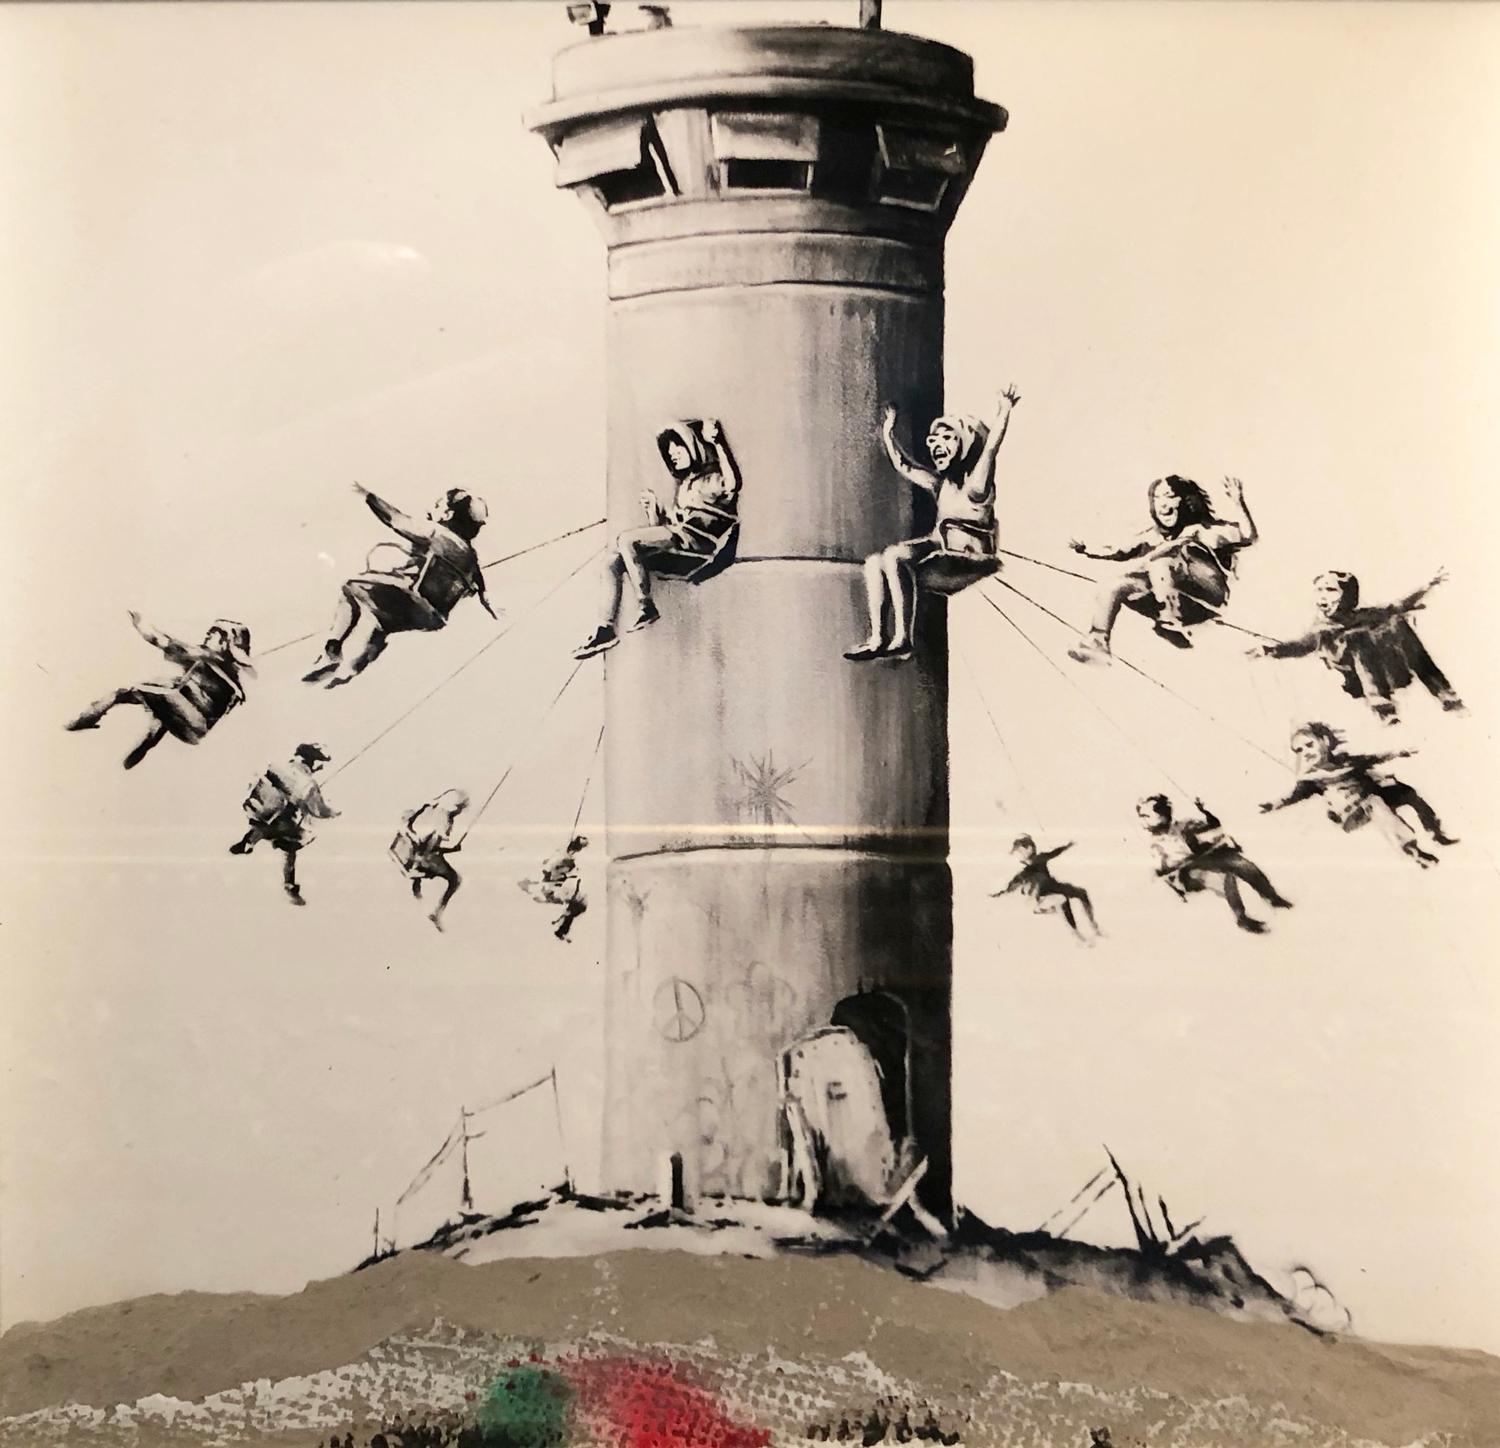 Banksy (British, b.1974), Walled Off Box Set, 2017, Giclee print with concrete piece of wall,